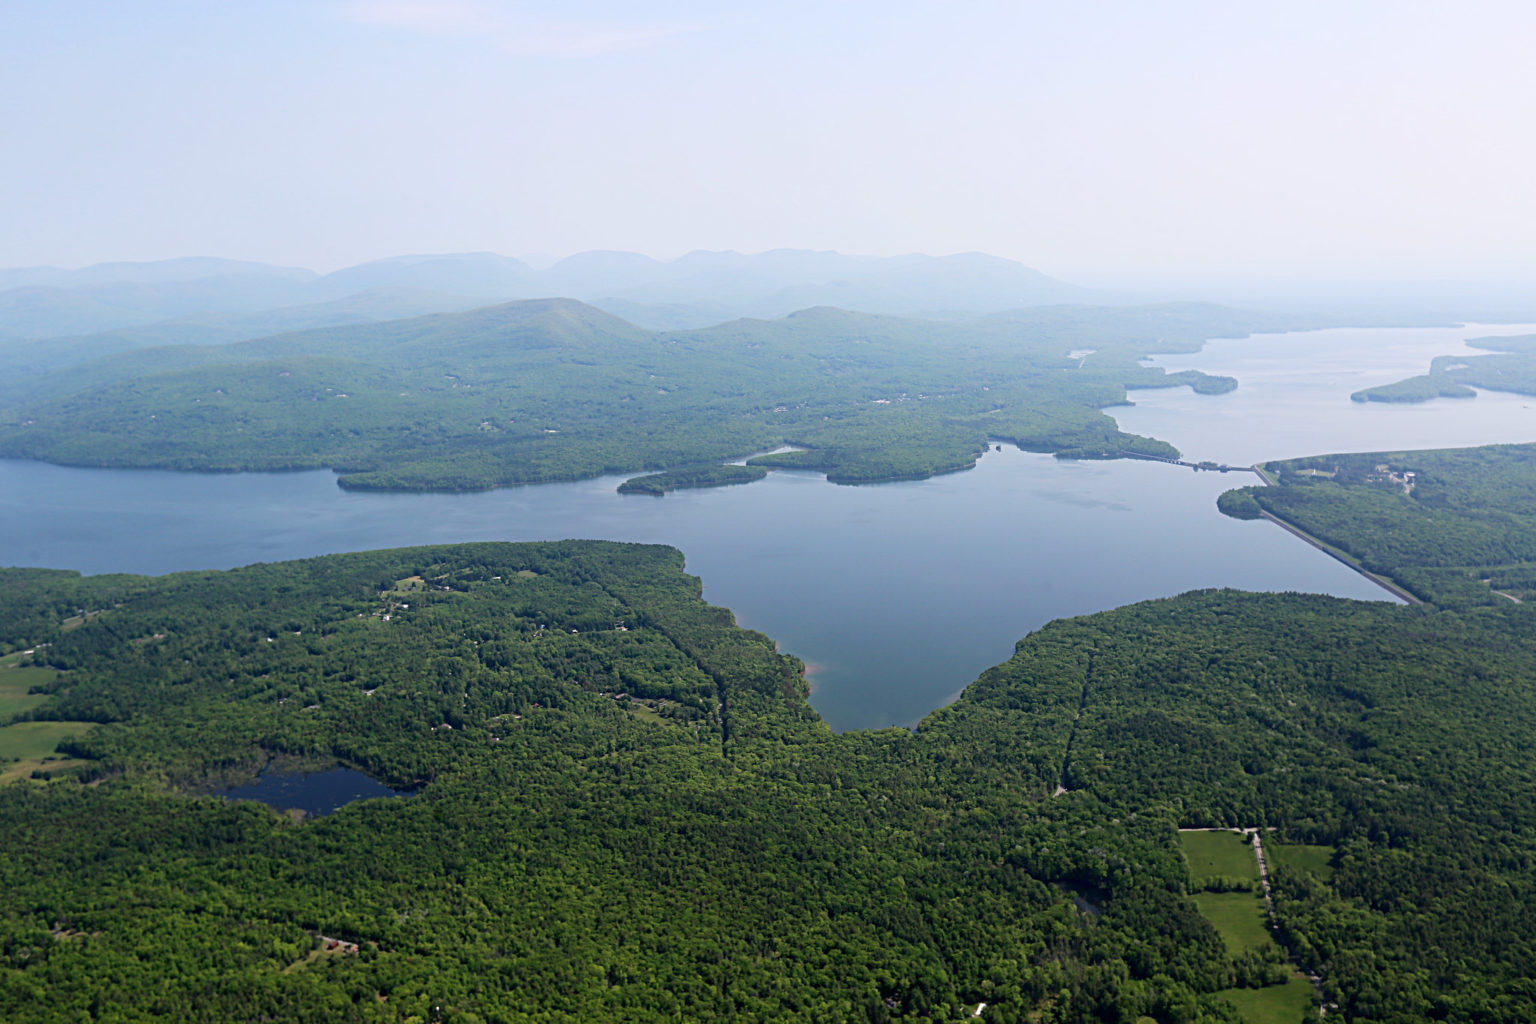 A birds-eye view of the Ashokan Reservoir in New York State